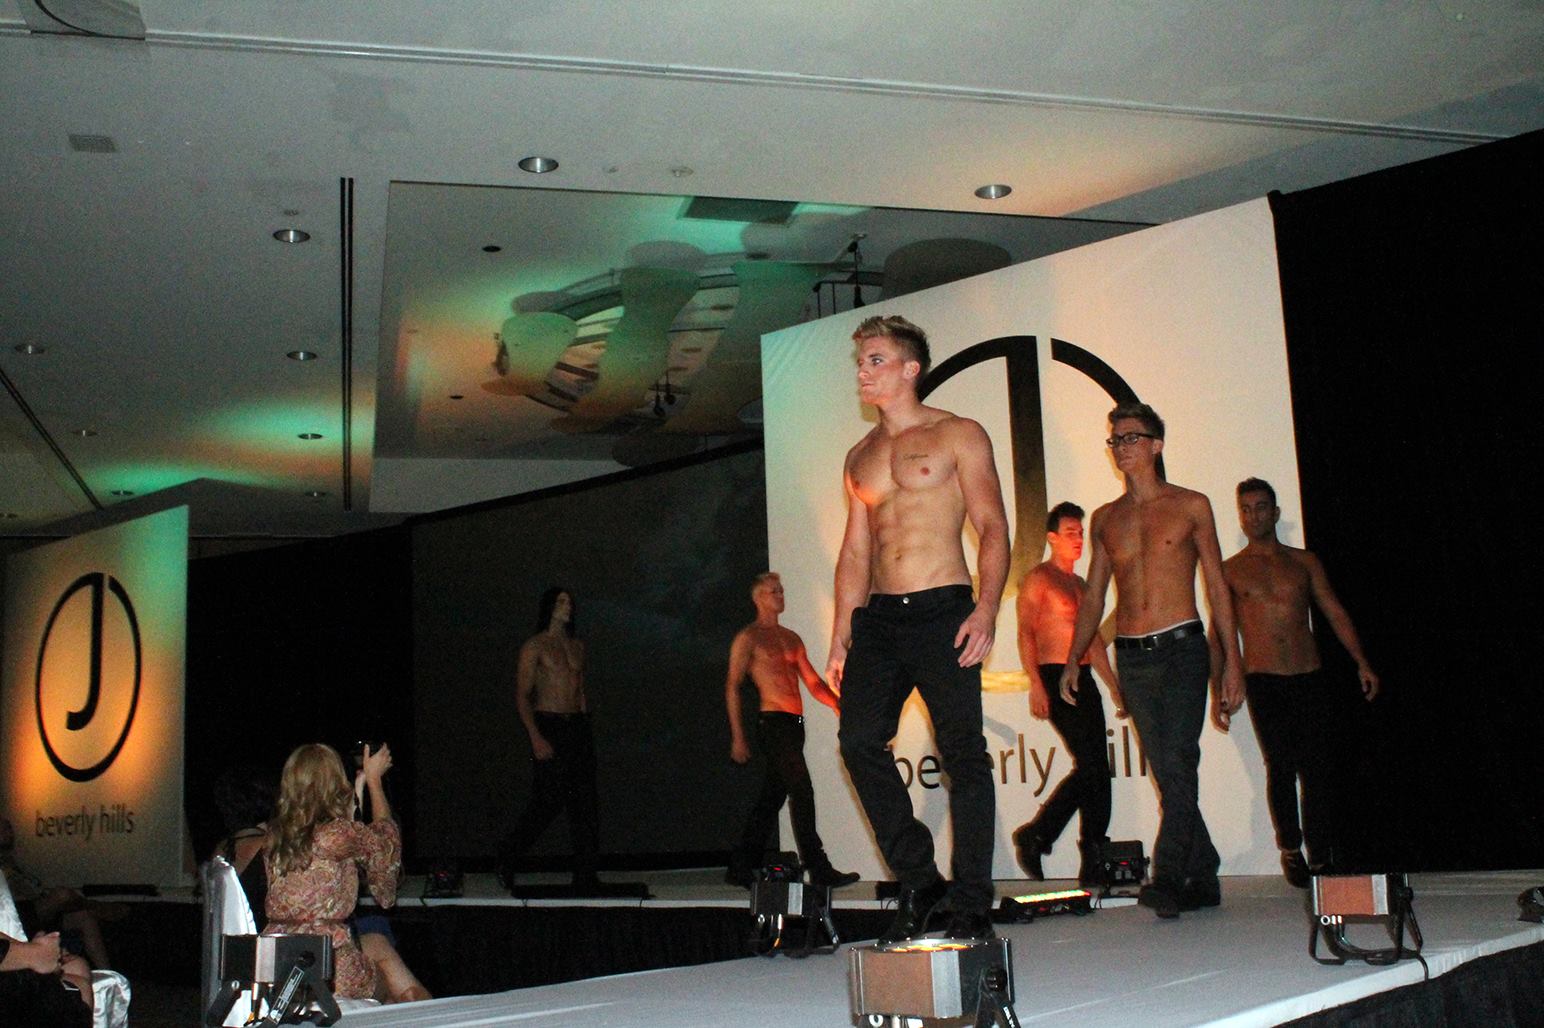 Andrew Vech leading the pack in the J Beverly Hills Runway Show